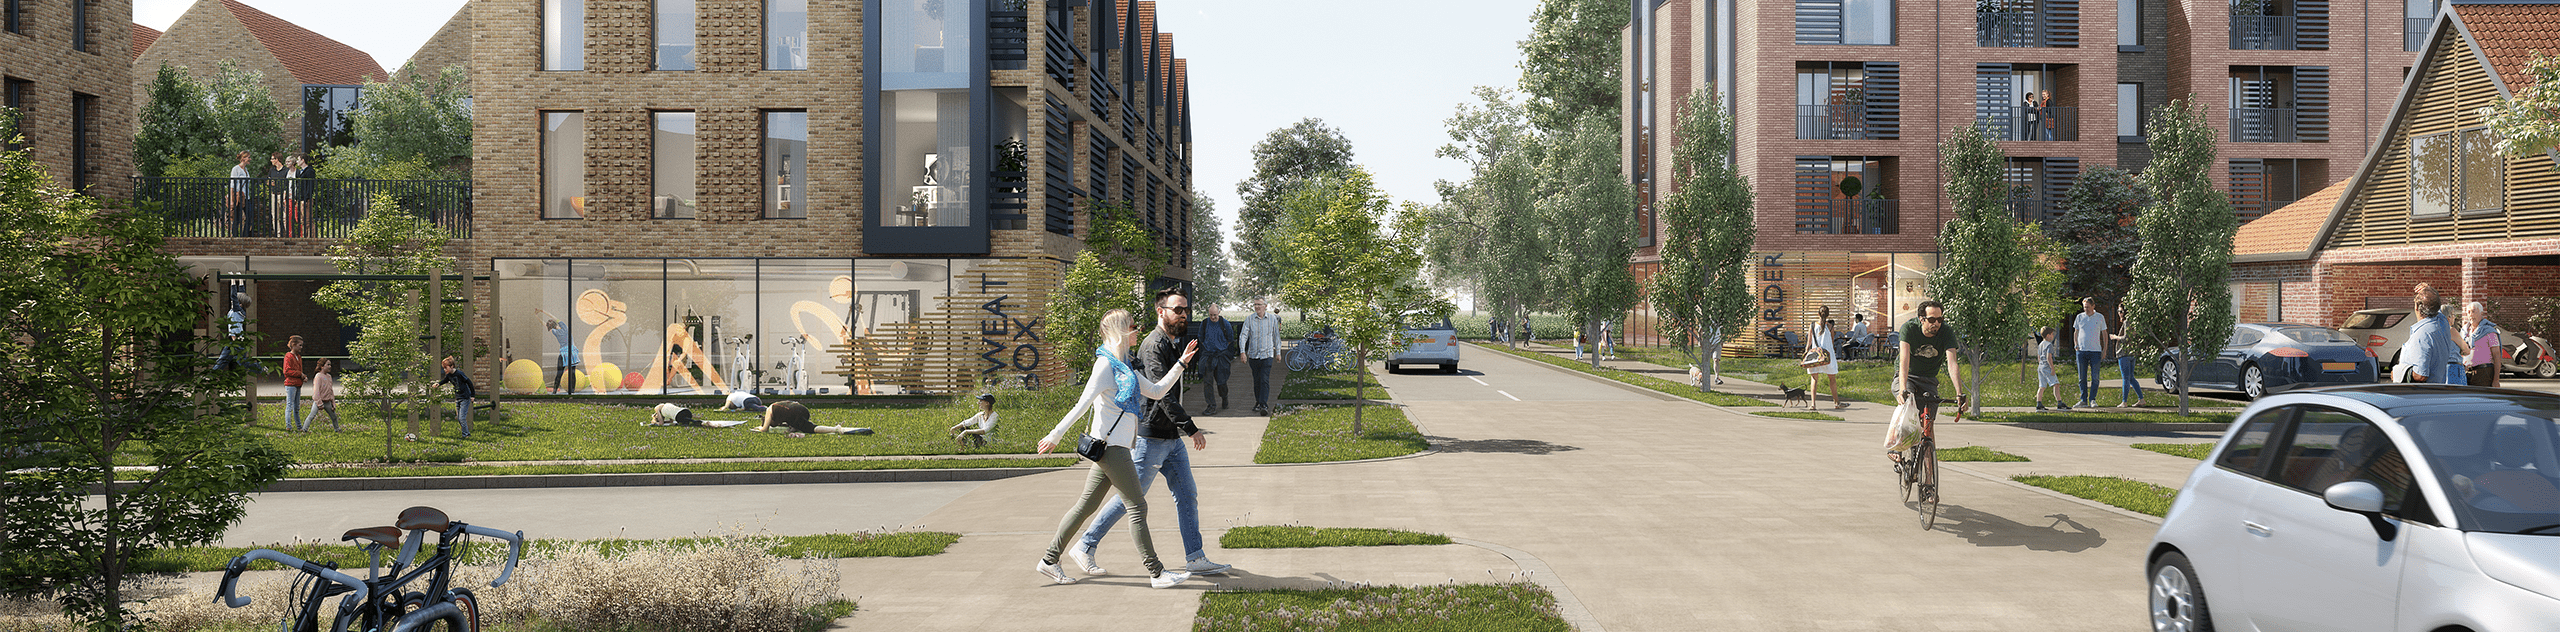 A CGI render of the community buildings and landscape proposed at Marleigh Phase 2. © JTP